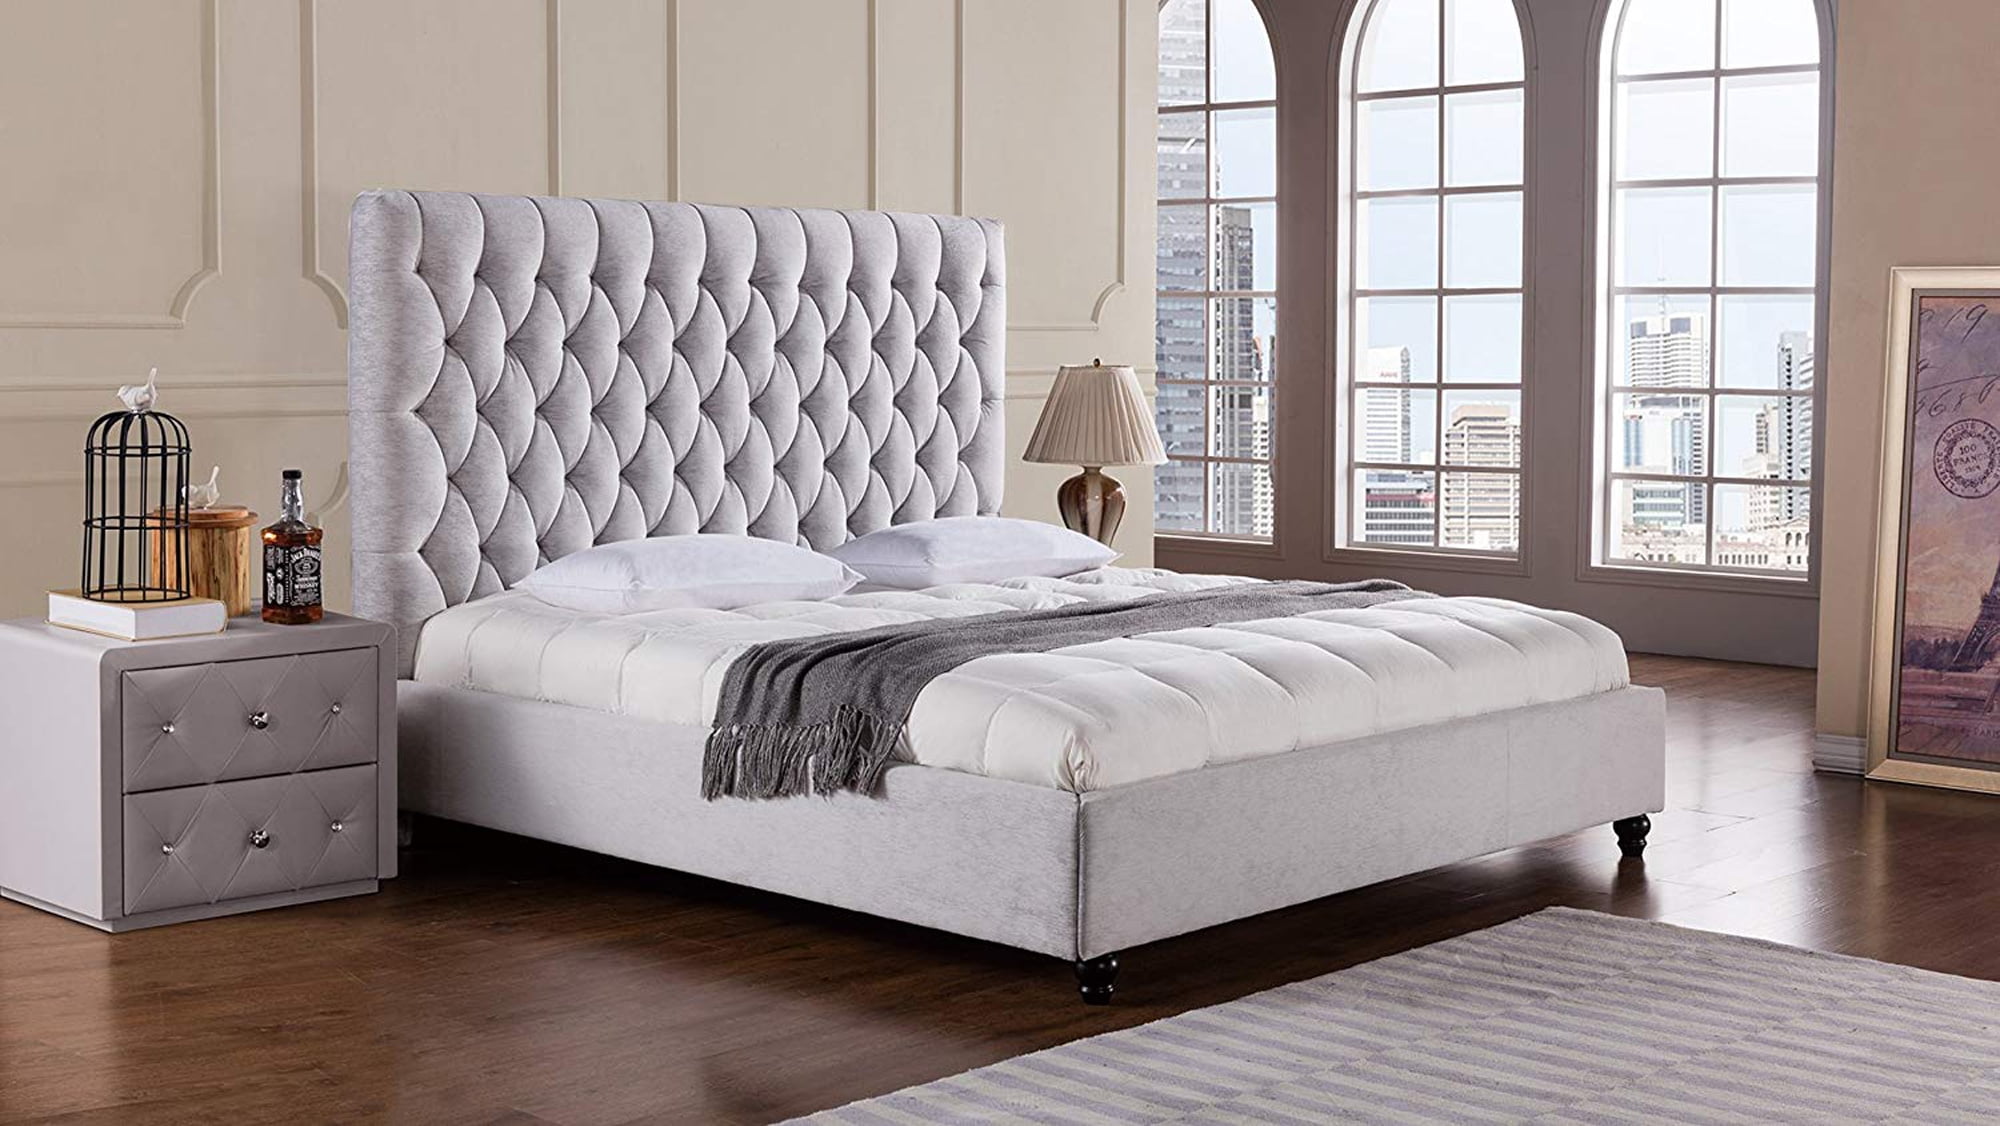 Fabric Upholstered Wooden California King Bed with High Button Tufted